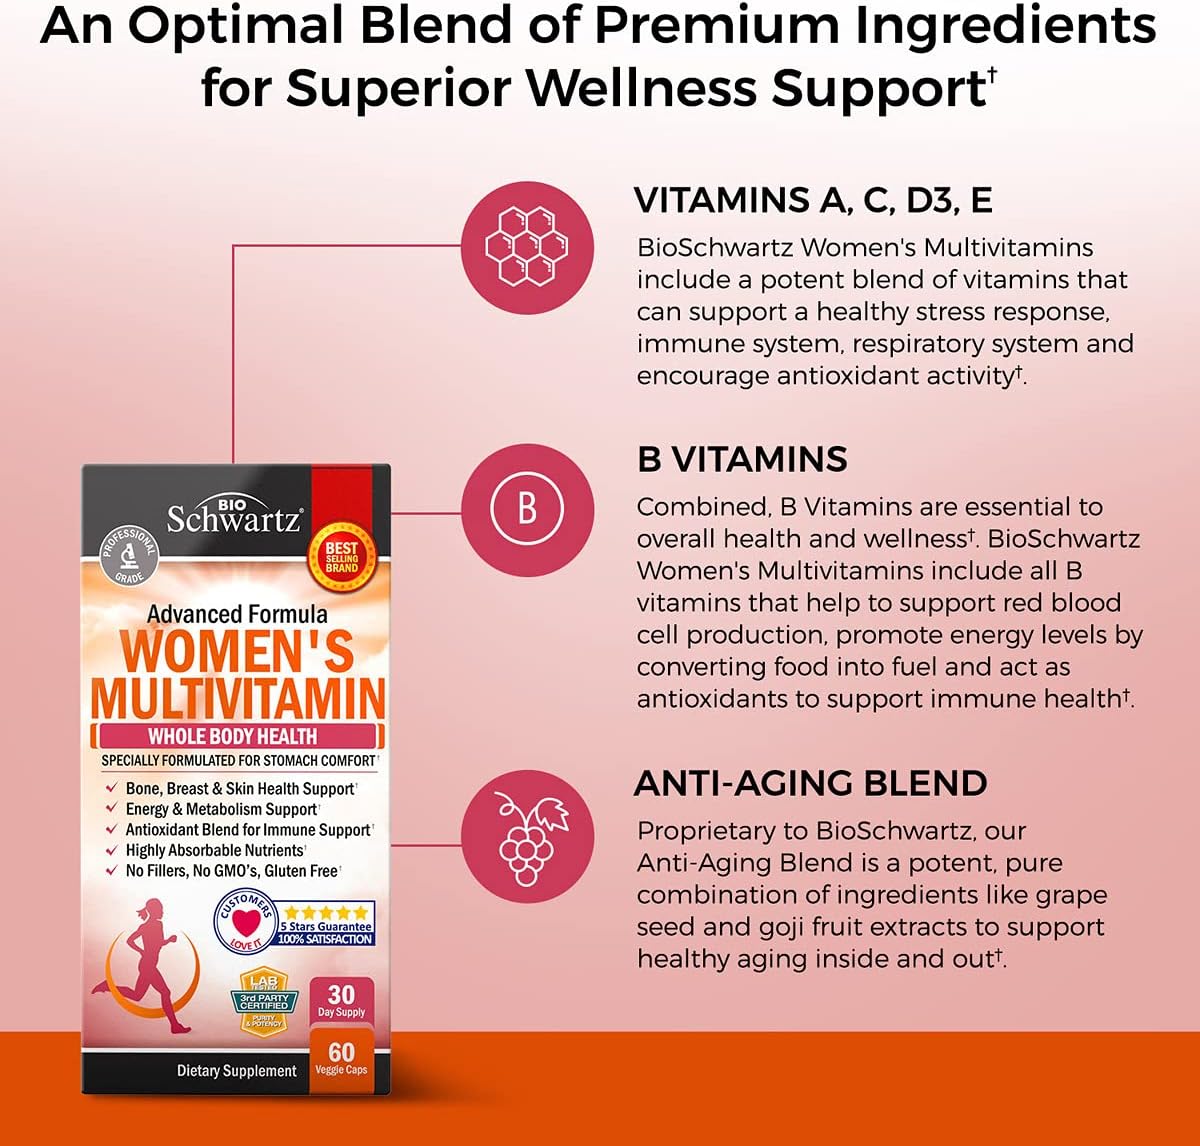 Multivitamin for Women with Vitamin D3 - Multivitamins for Bone Breast Skin Joint Energy - Vitamins for Immunity Support - Immune System Boost Natural Immune Defense - Joint Support Supplement - 60Ct